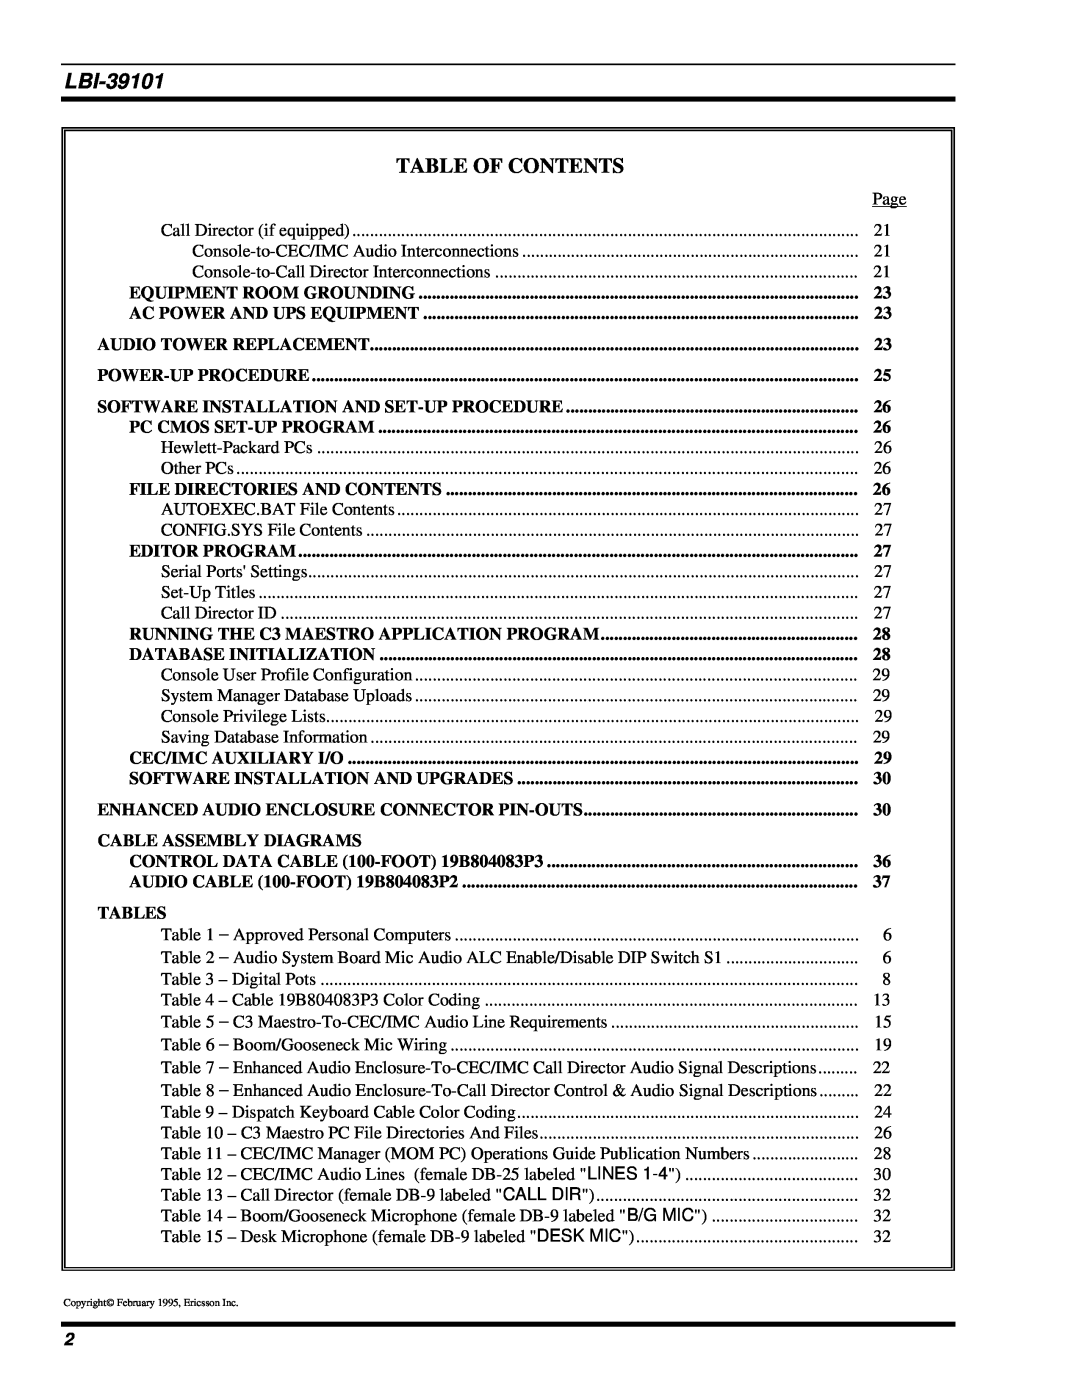 Ericsson LBI-39101A manual Table Of Contents 